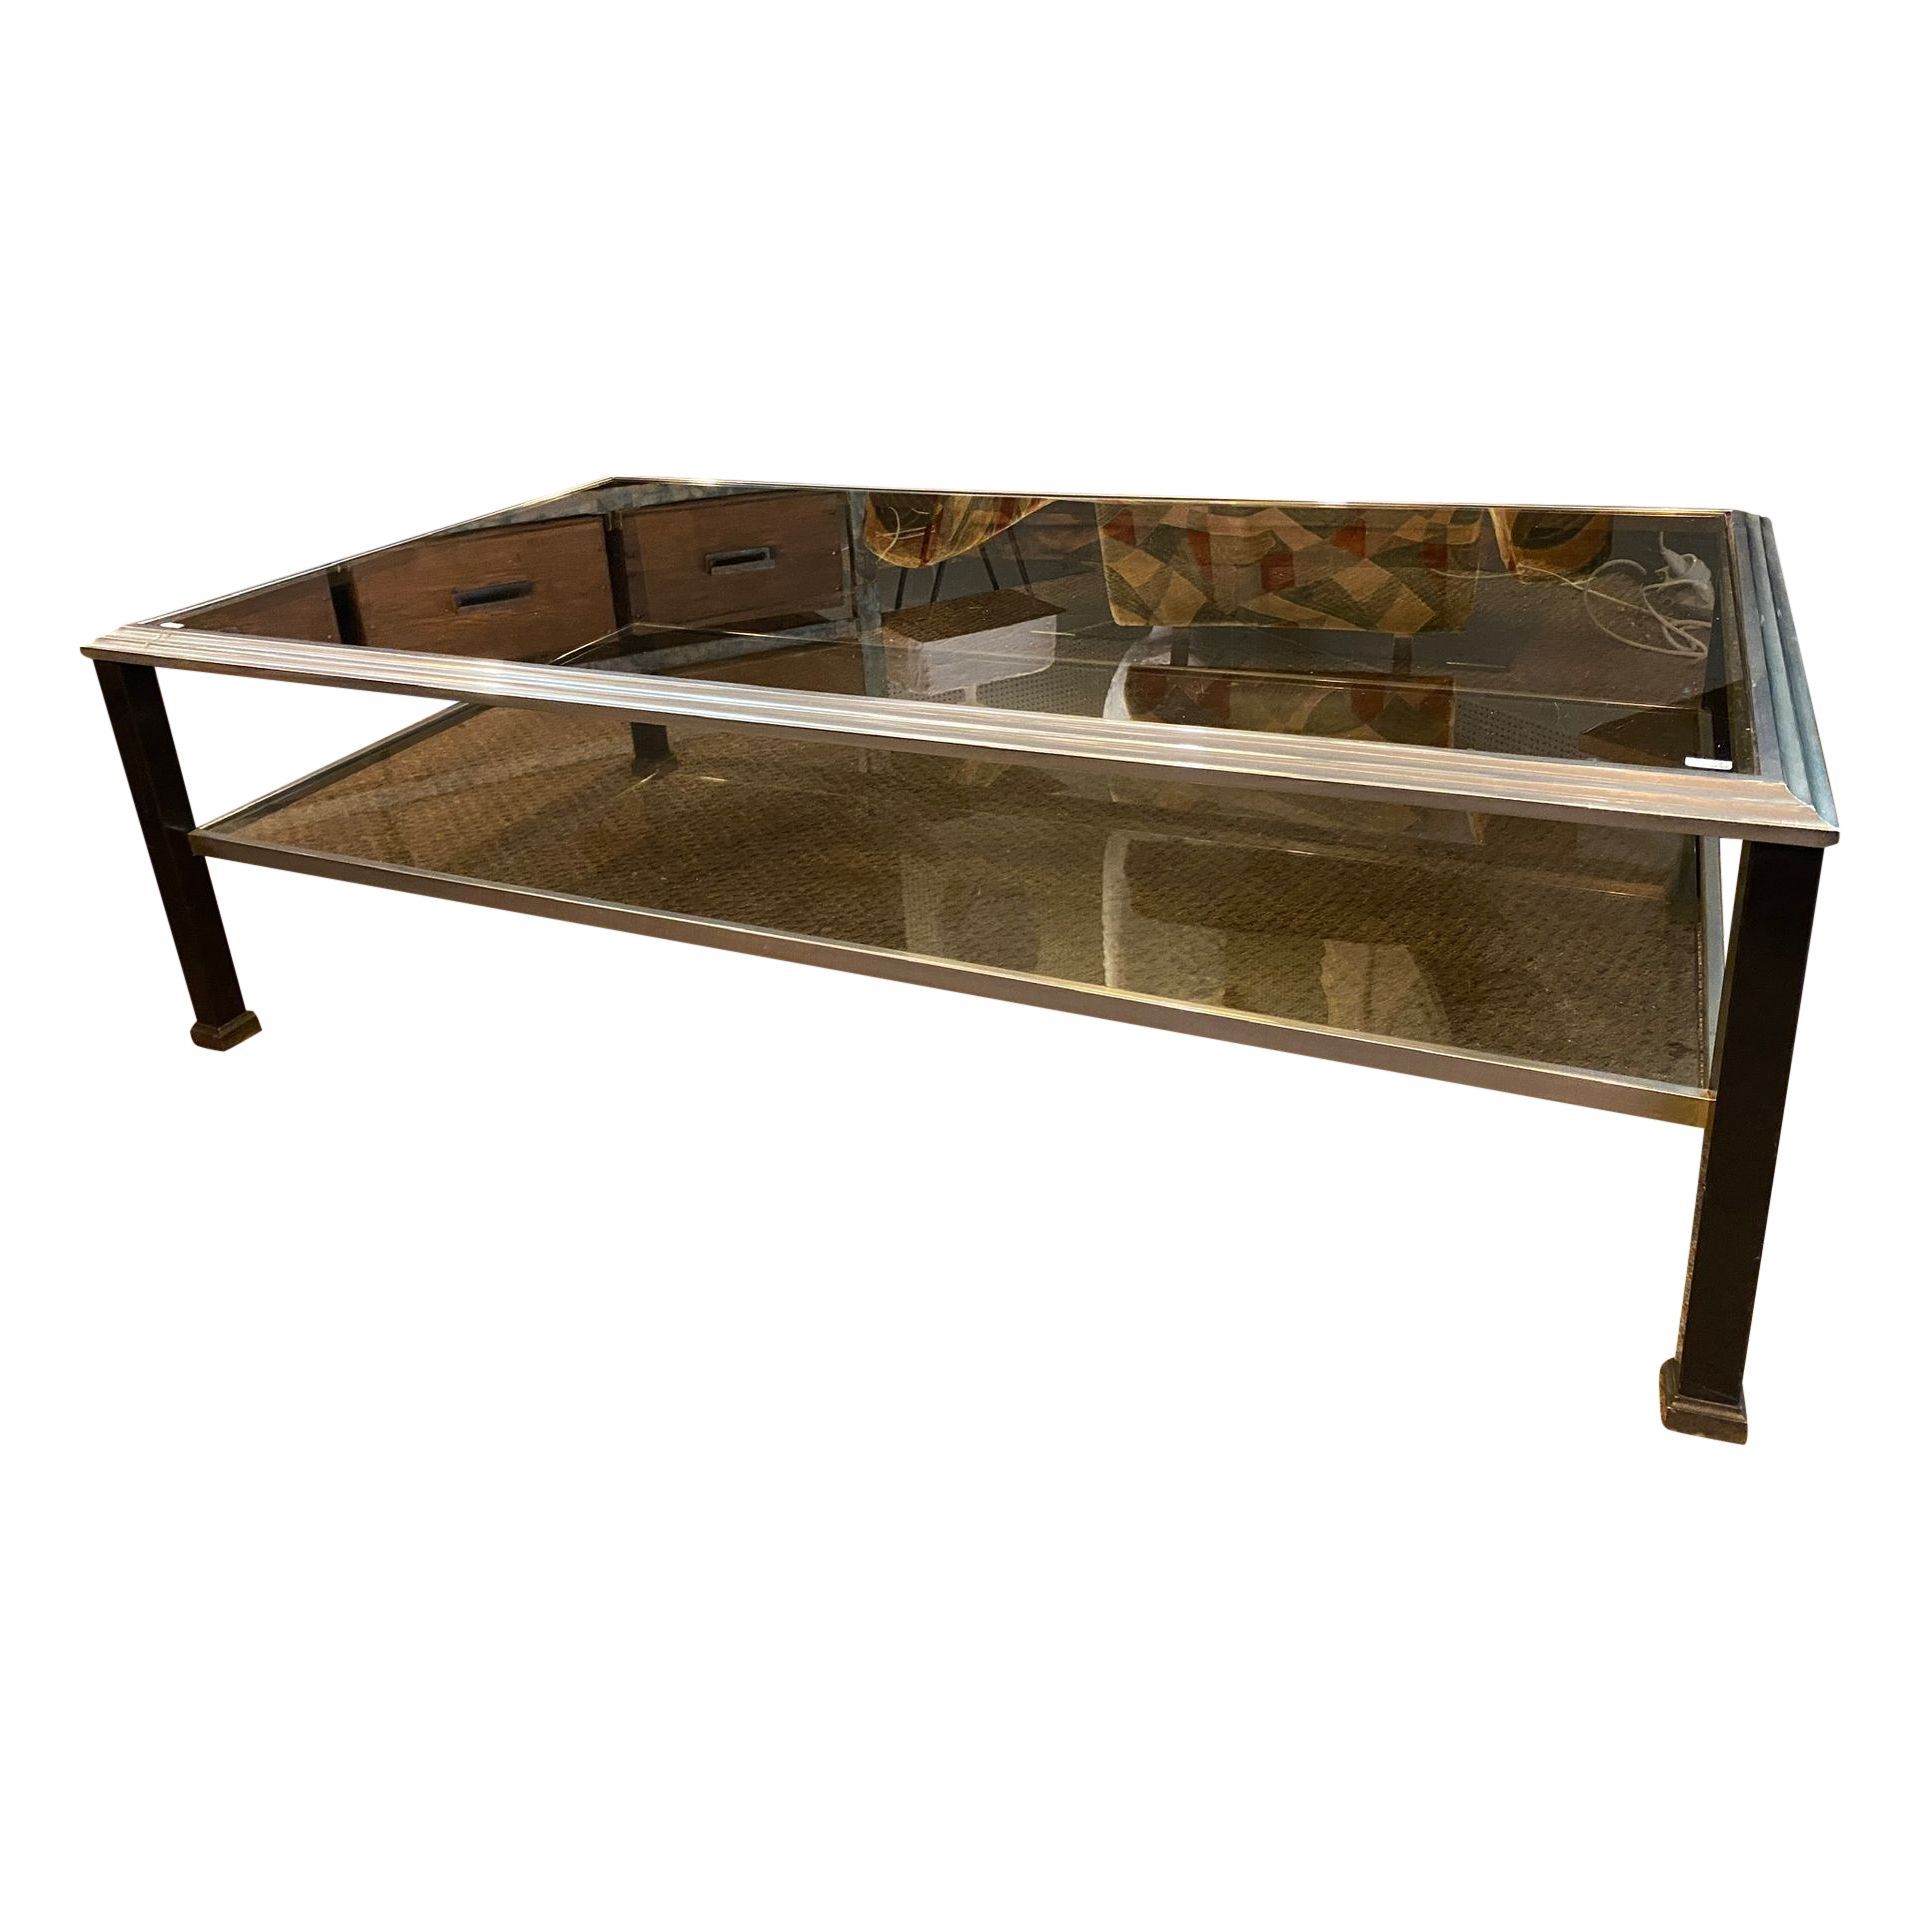 1970 Nickel Plated Bronze And Glass Coffee Table – Coffee Tables | Antikeo Within Glass Top Coffee Tables (View 9 of 20)